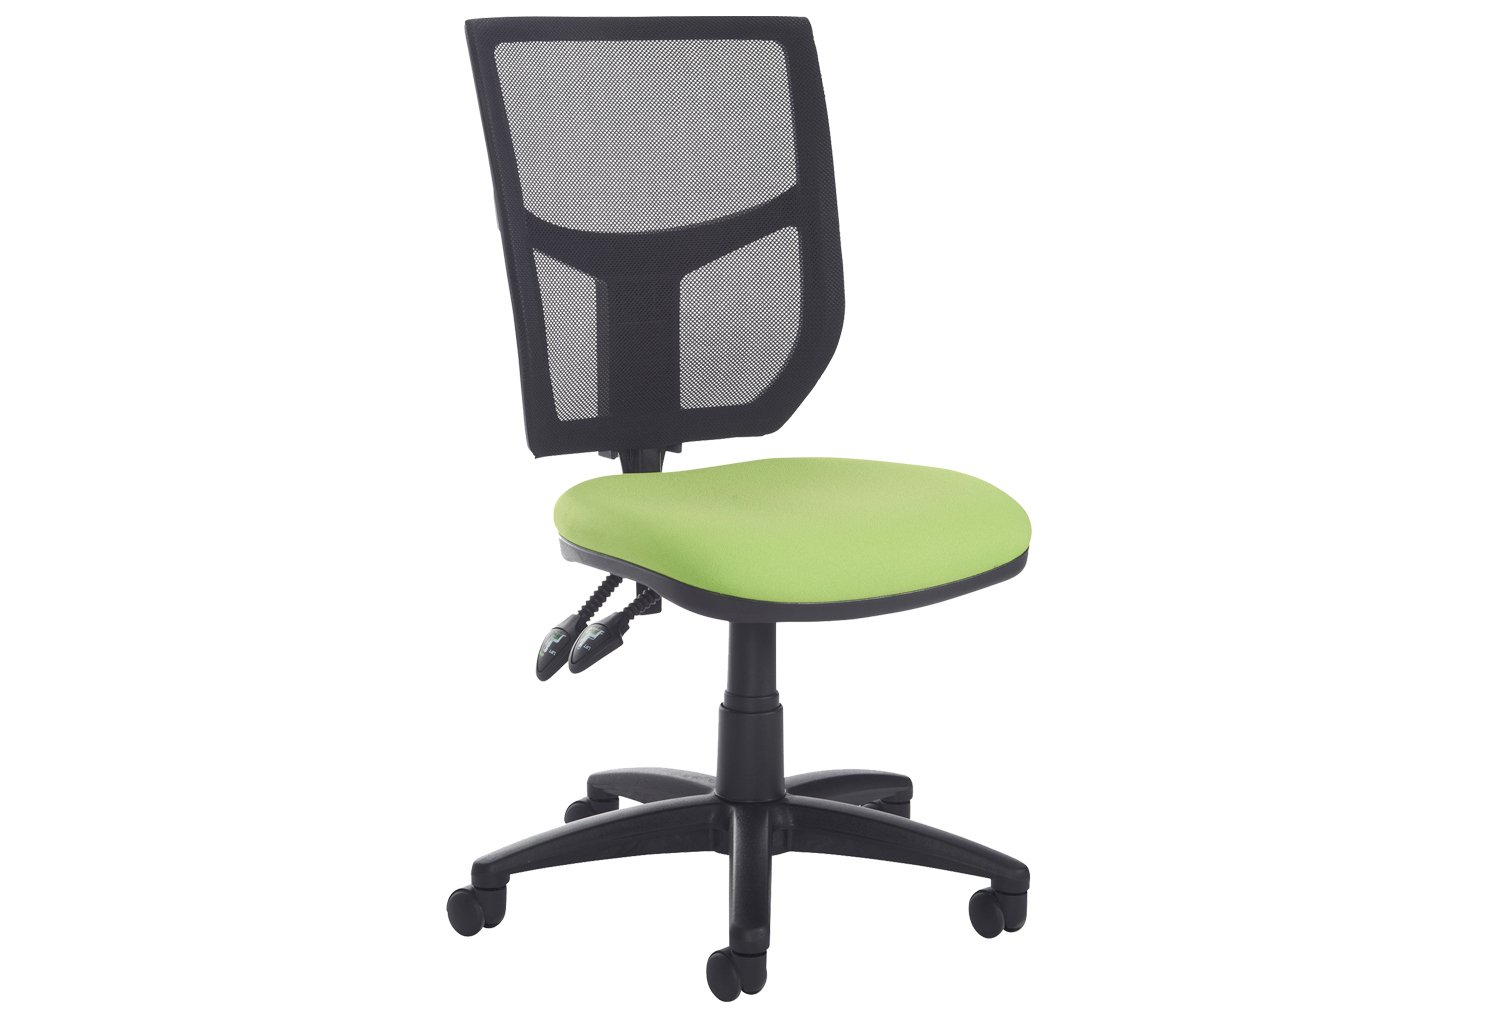 Gordy 2 Lever Mesh Back Operator Office Chair No Arms, Slip, Fully Installed